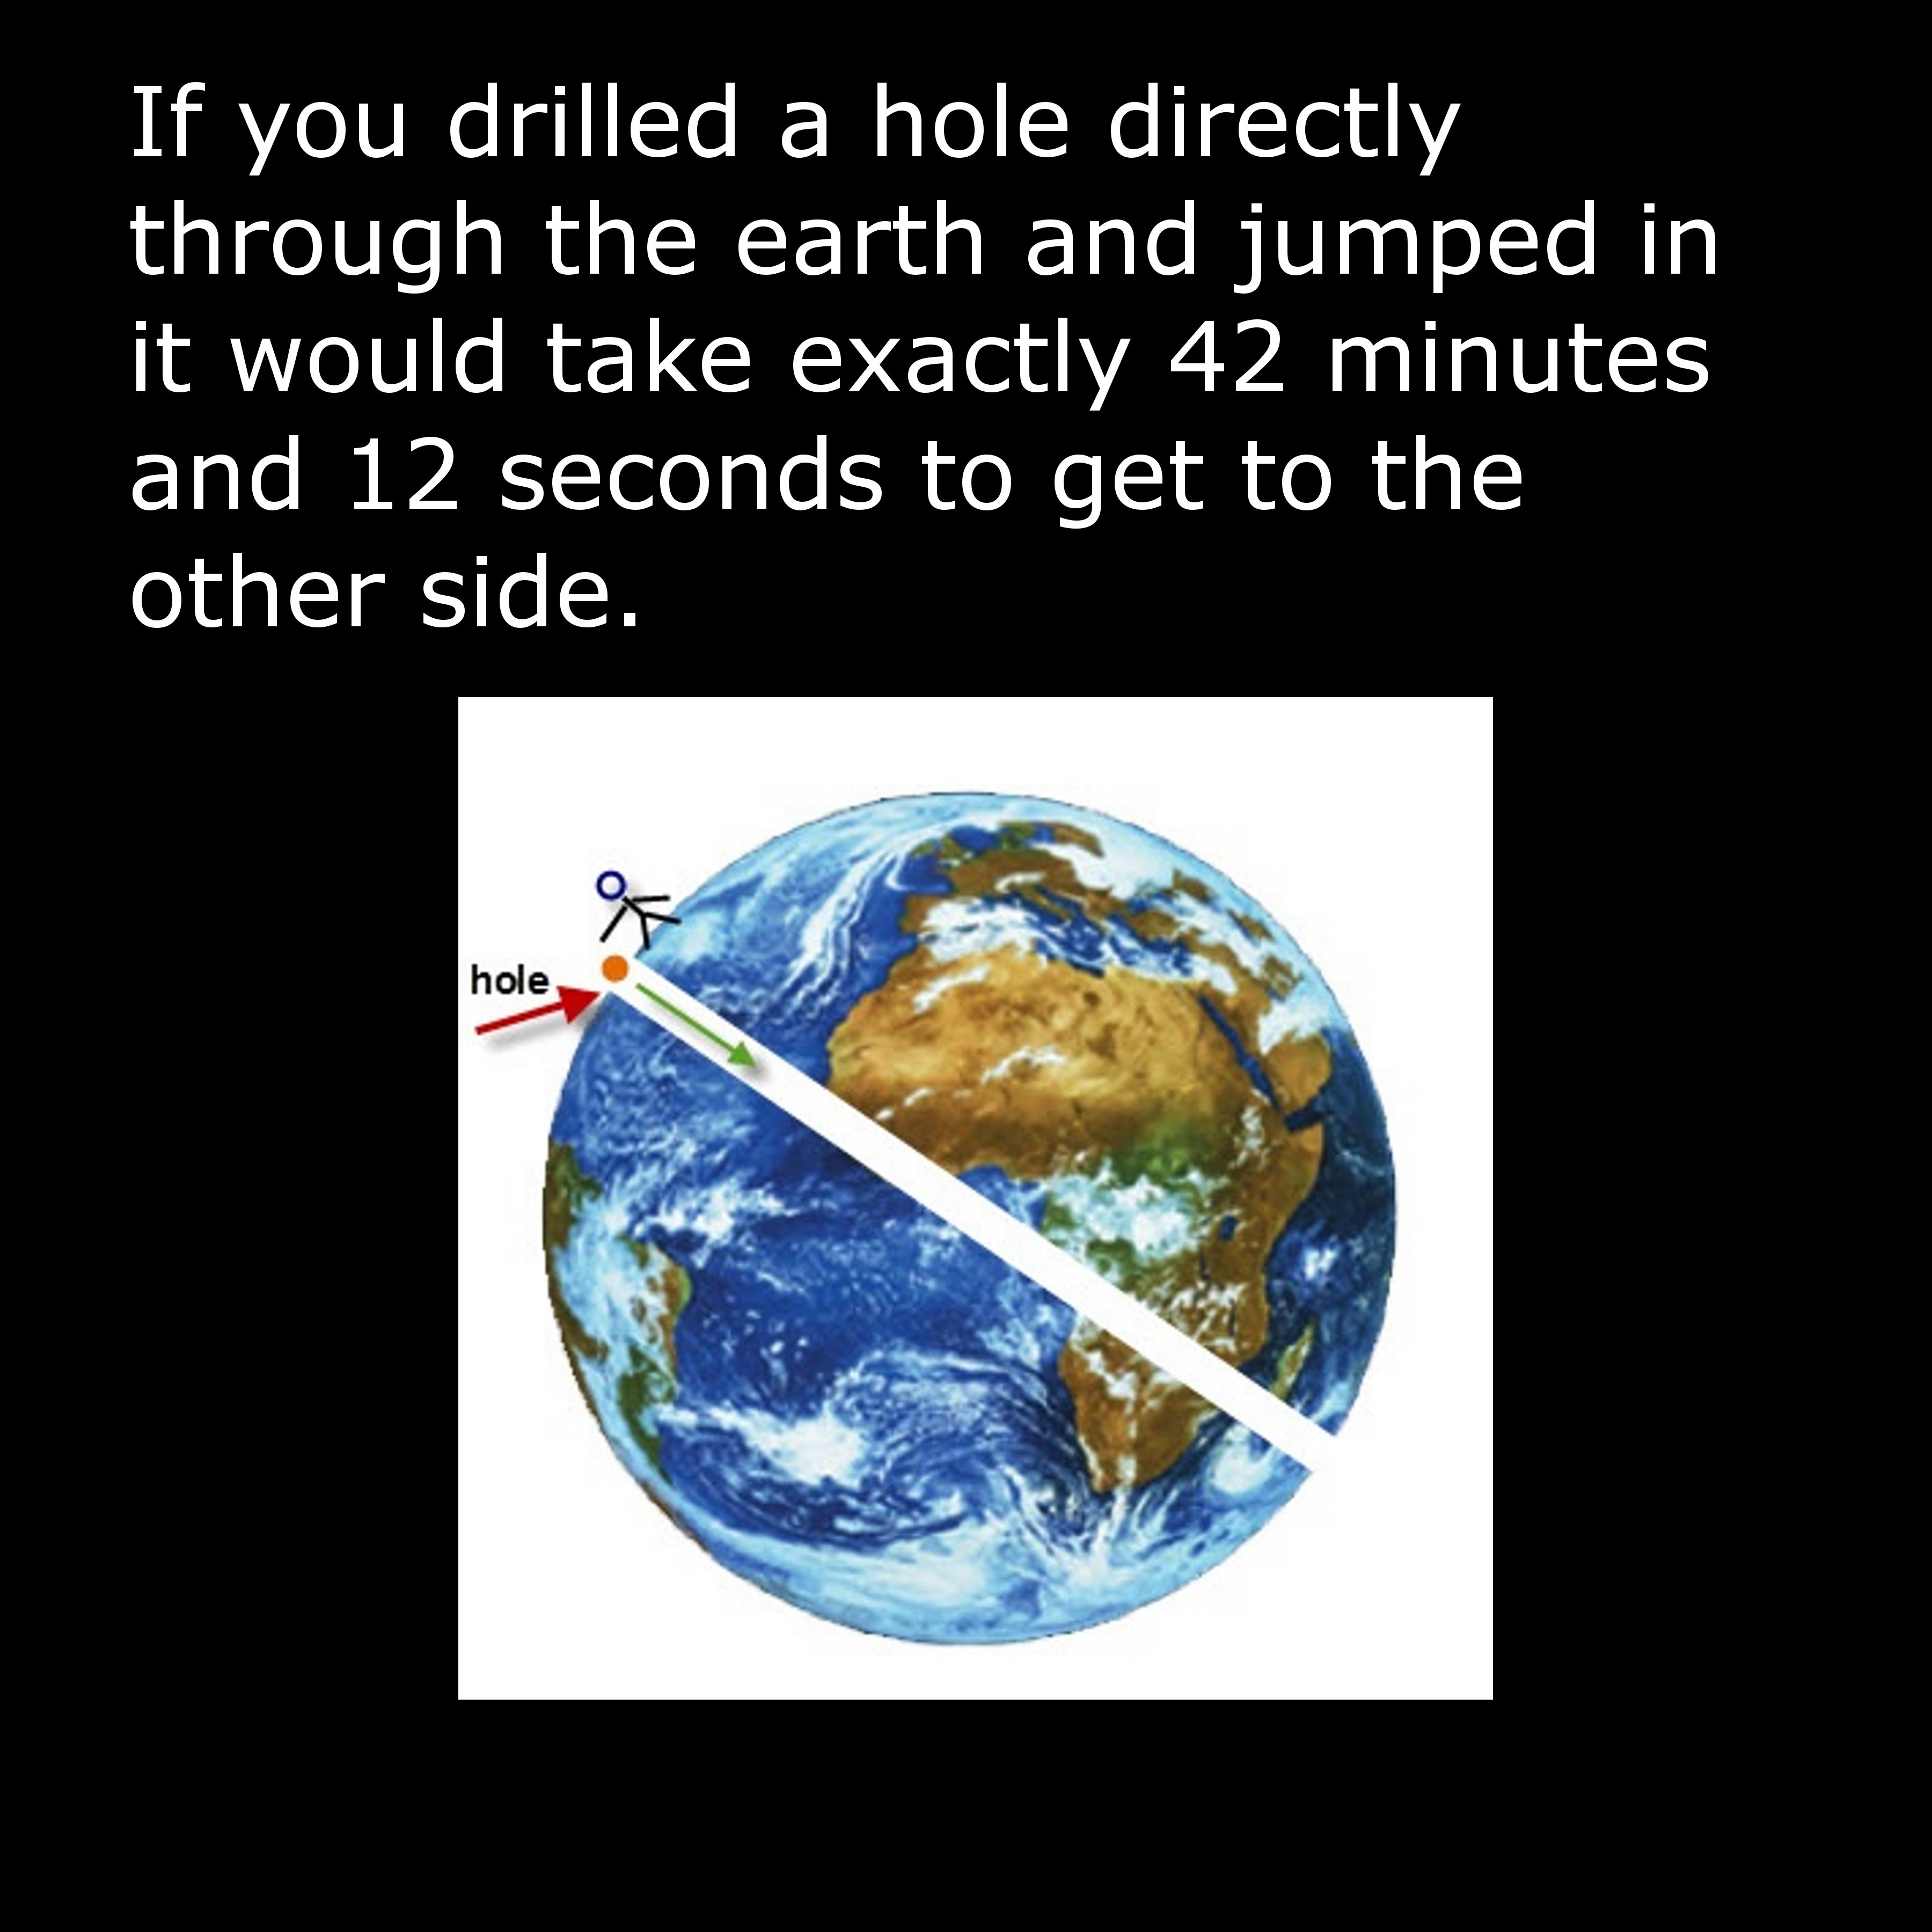 earth - If you drilled a hole directly through the earth and jumped in it would take exactly 42 minutes and 12 seconds to get to the other side. % hole